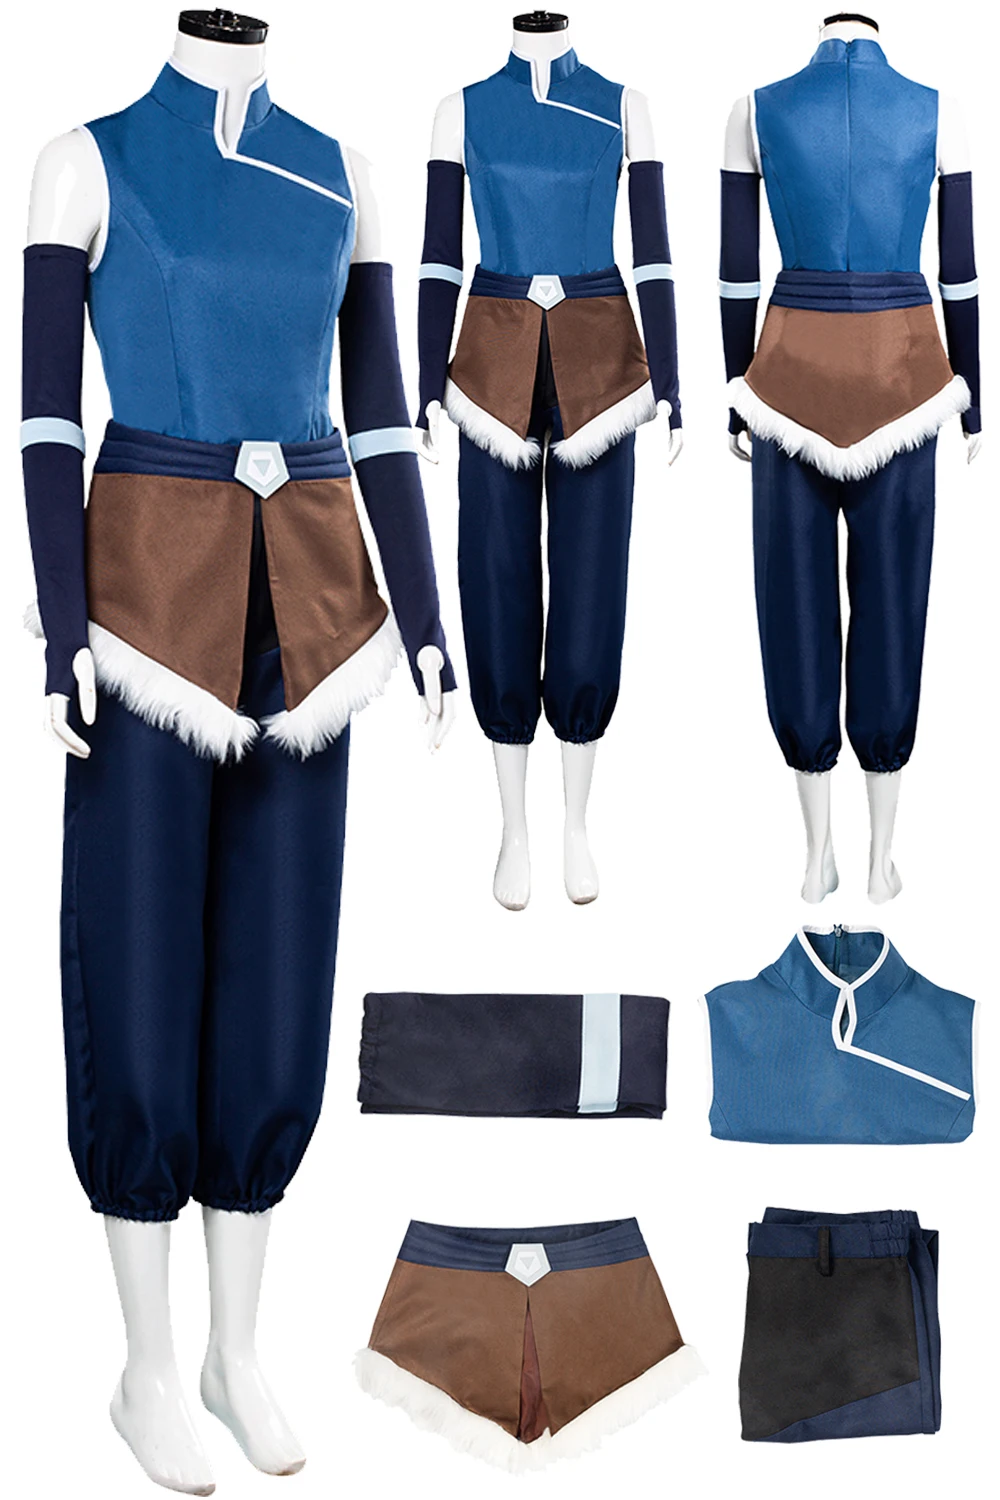 

Korra Cosplay Fantasy Costume Cartoon Avatar Last Cosplay Airbender Roleplay Armguard Apron Outfits Adult Women Halloween Suits